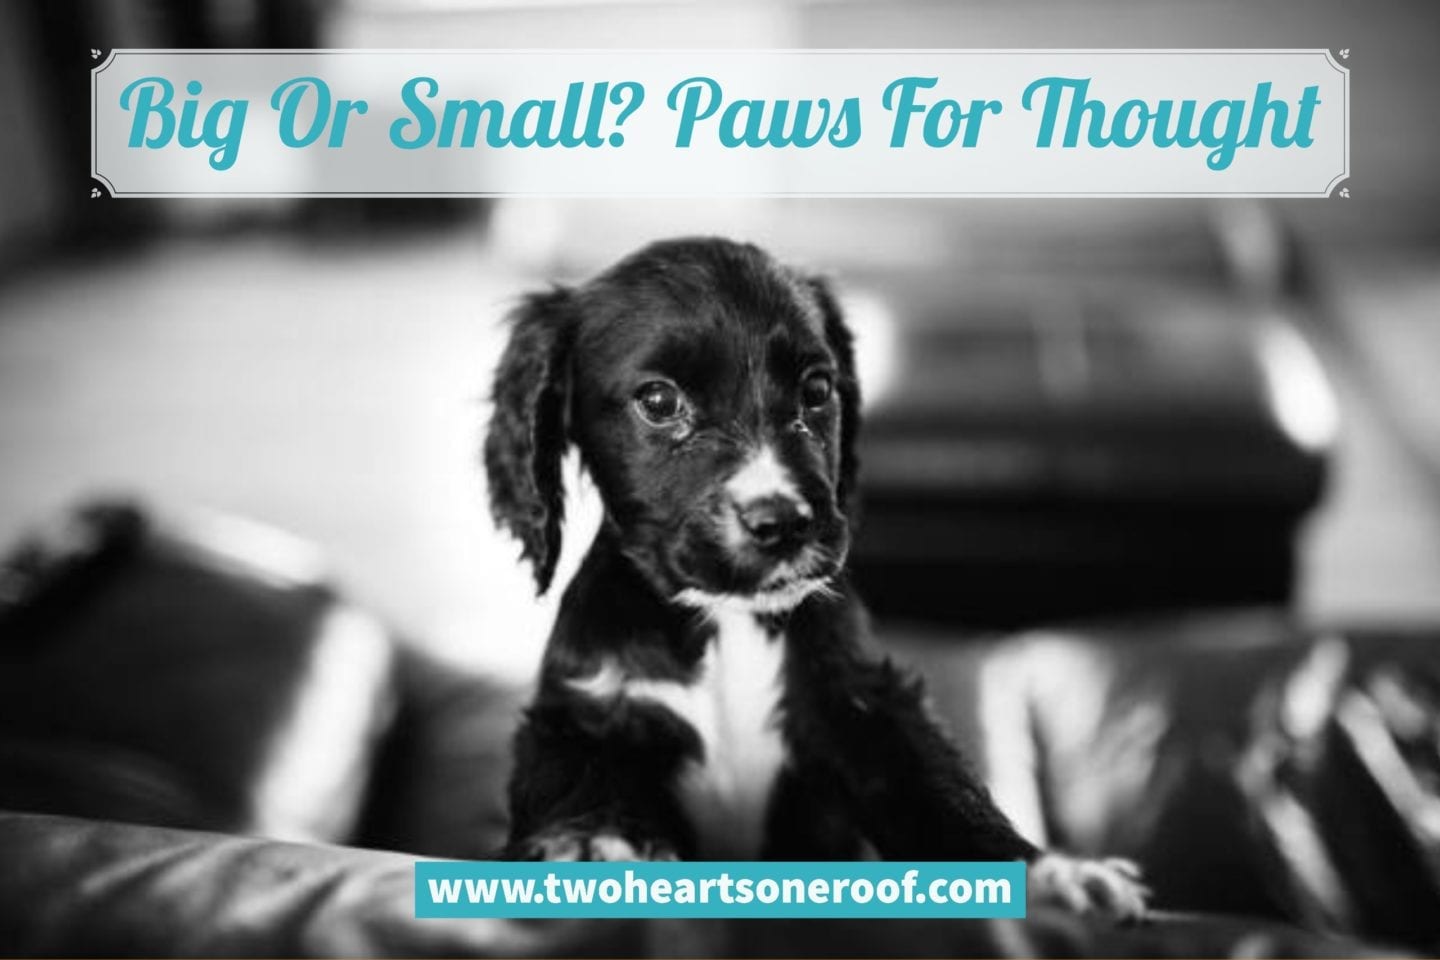 Big Or Small? Paws For Thought – What Pet Is Best For Your Family